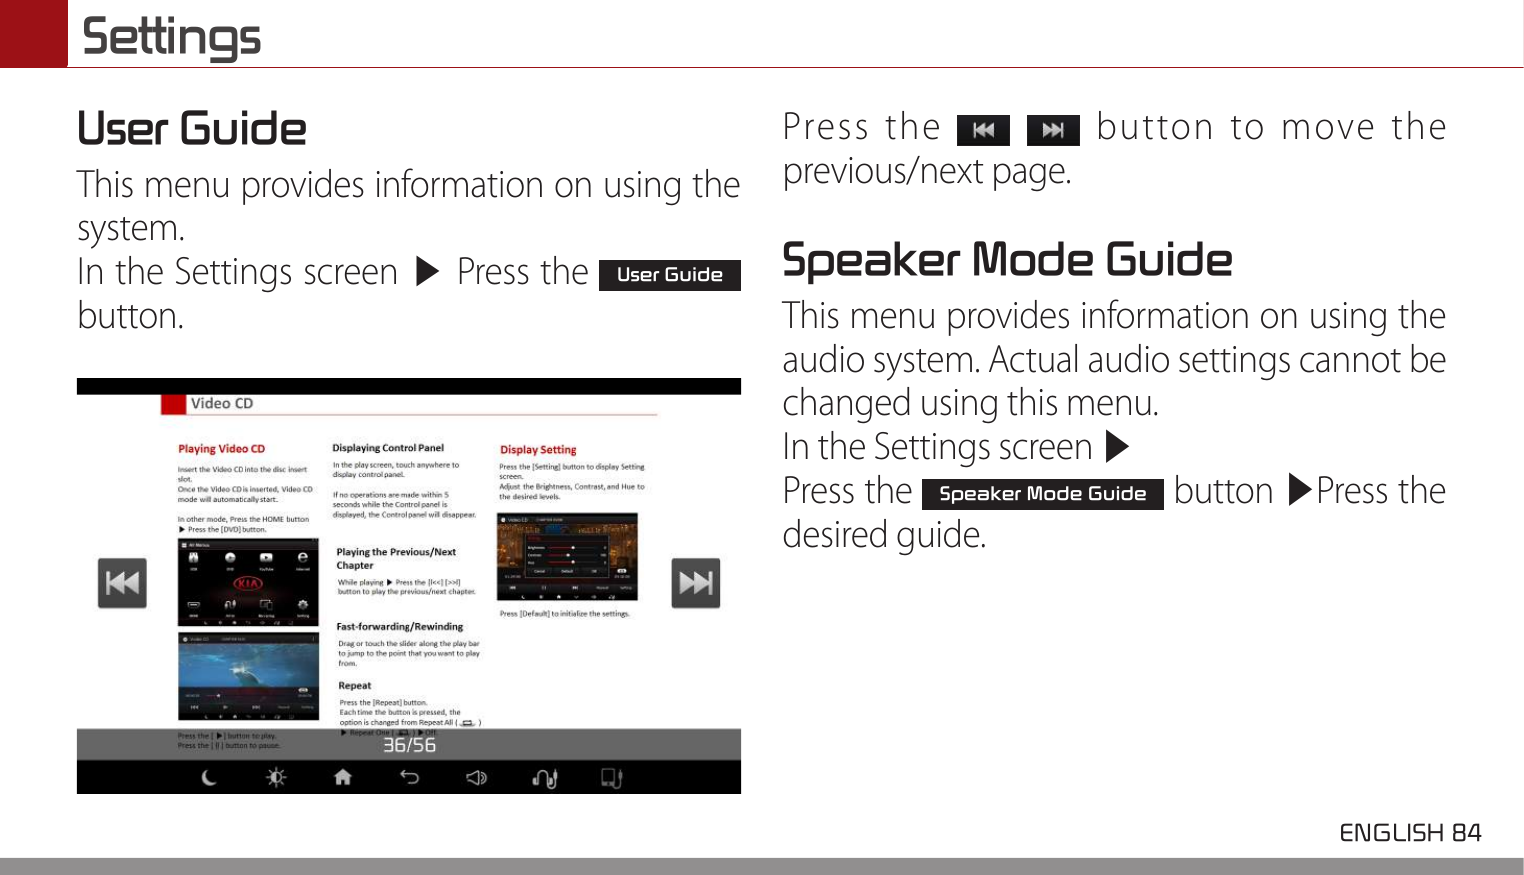 Settings ENGLISH 84 User GuideThis menu provides information on using the system. In the Settings screen ▶ Press the User Guide button.Press the    button to move the previous/next page. Speaker Mode Guide This menu provides information on using the audio system. Actual audio settings cannot be changed using this menu. In the Settings screen ▶ Press the Speaker Mode Guide button ▶Press the desired guide. 